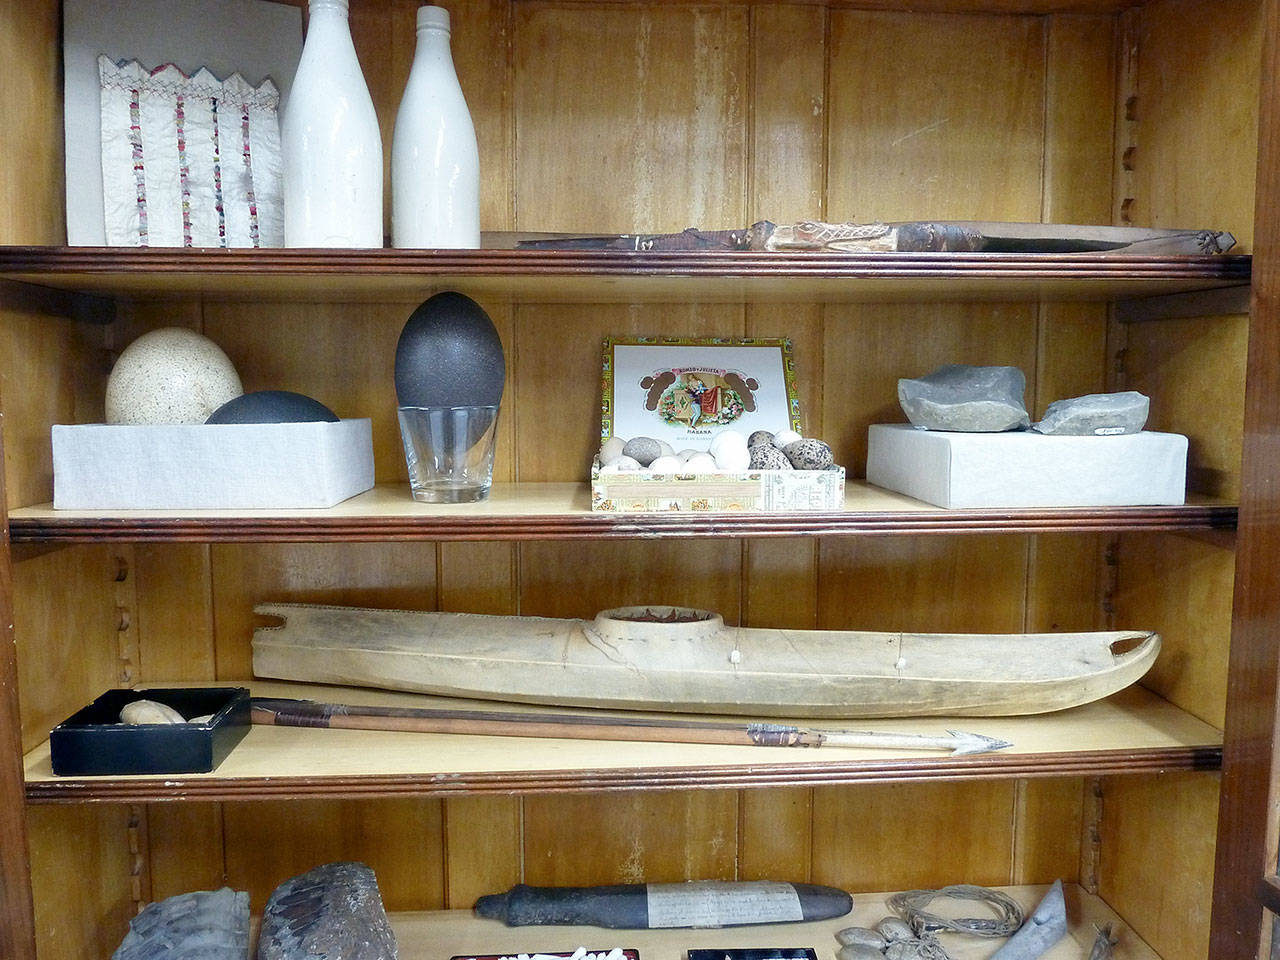 Cabinets of Curiosities contained any number and variety of interesting items. These shelves hold a scientifically cataloged egg collection, a Bering Strait kayak and stoneware beer bottles from Polk Marine Park, among other items. (Bill Tennent)